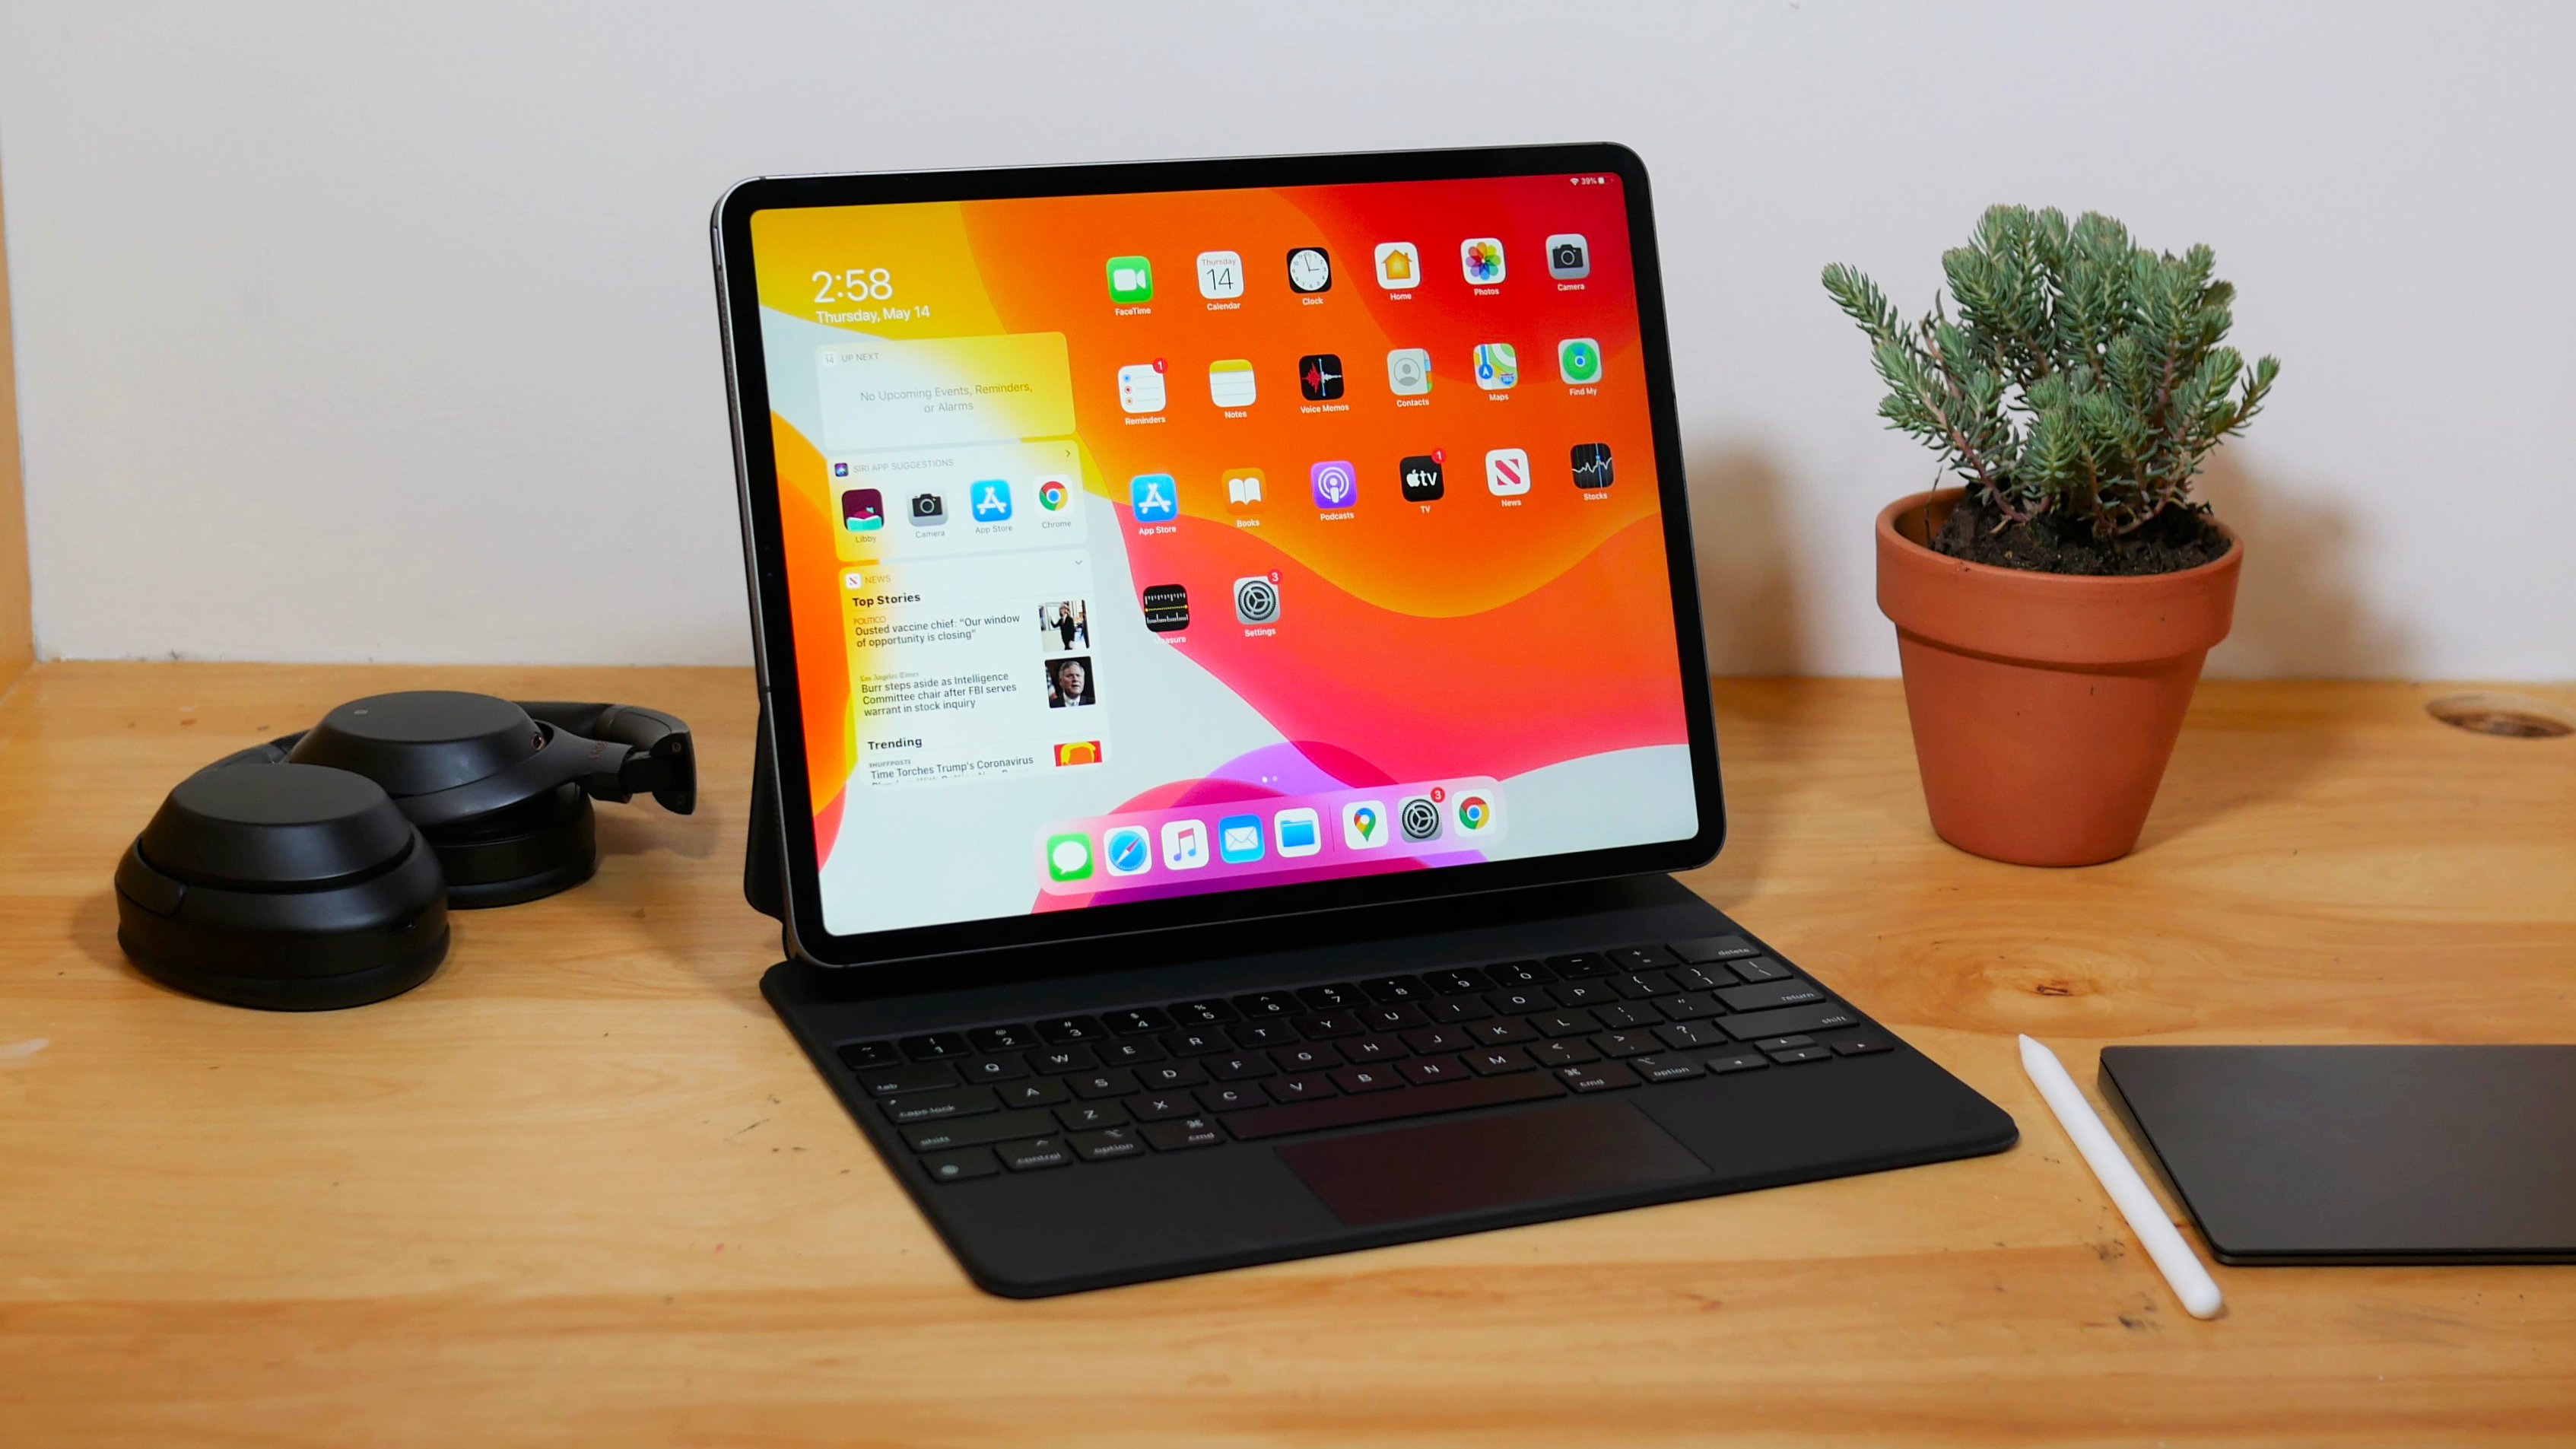 Magic Keyboard for iPad Pro review